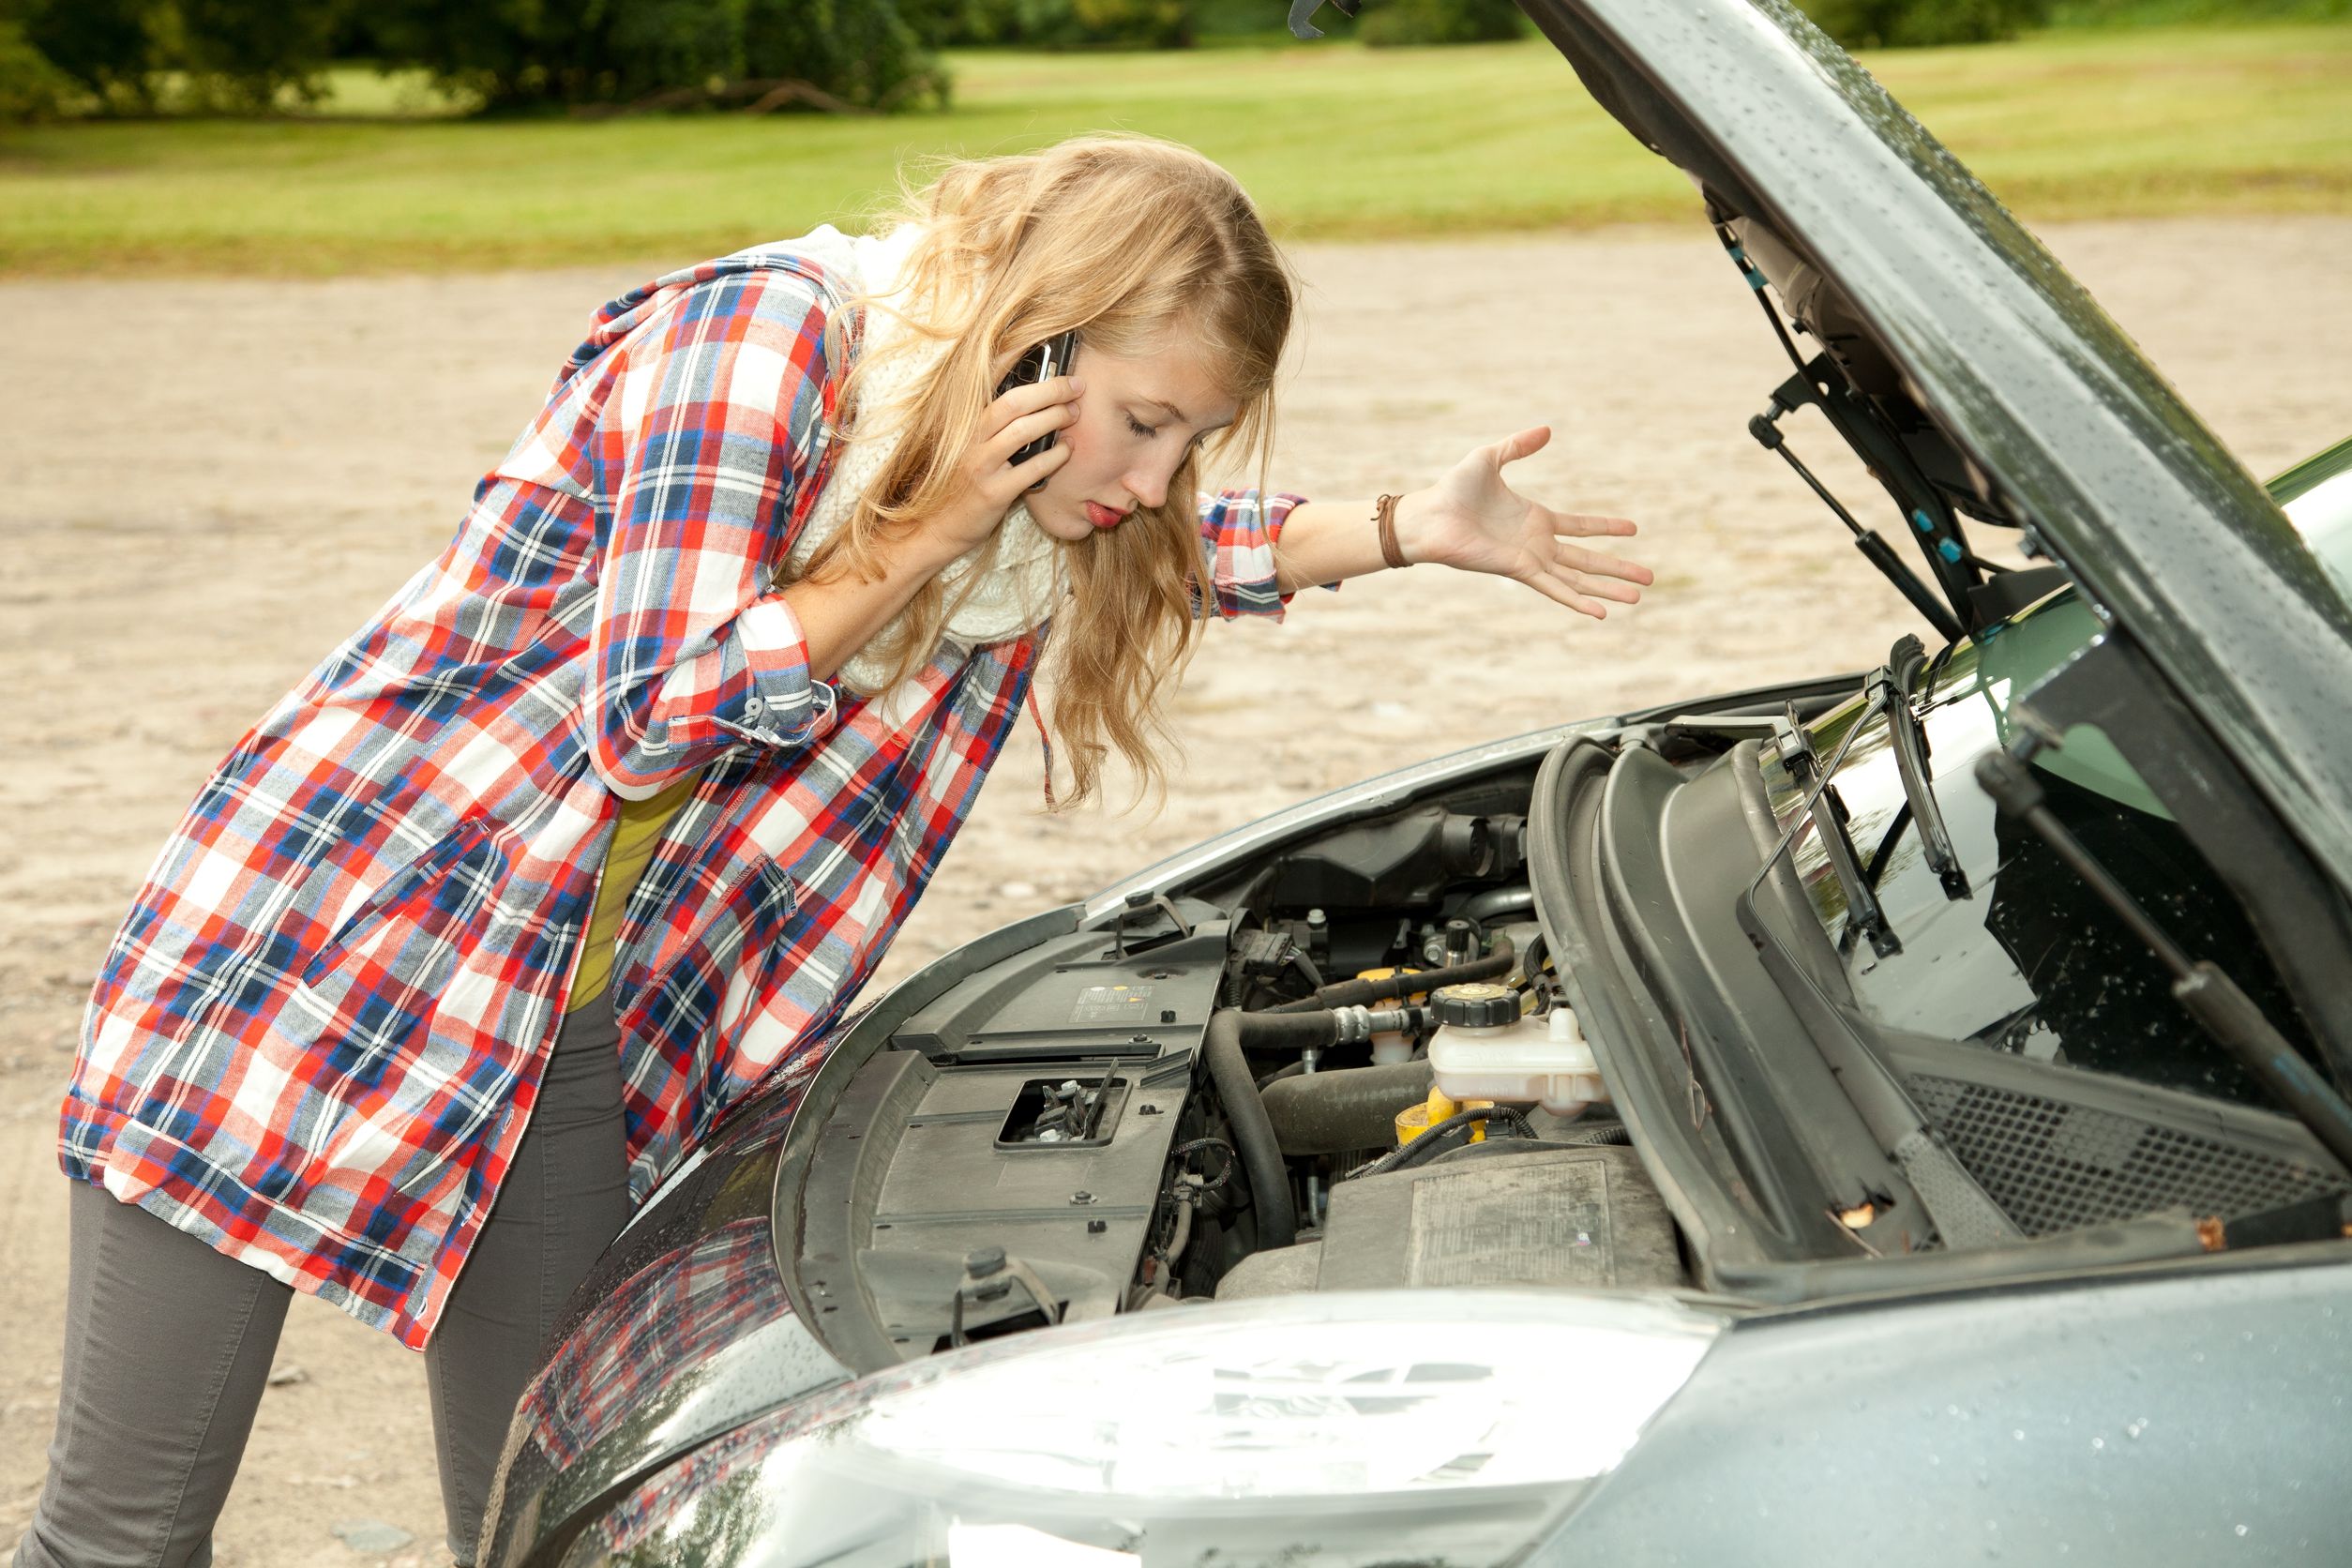 What are the first things to consider when troubleshooting auto problems?